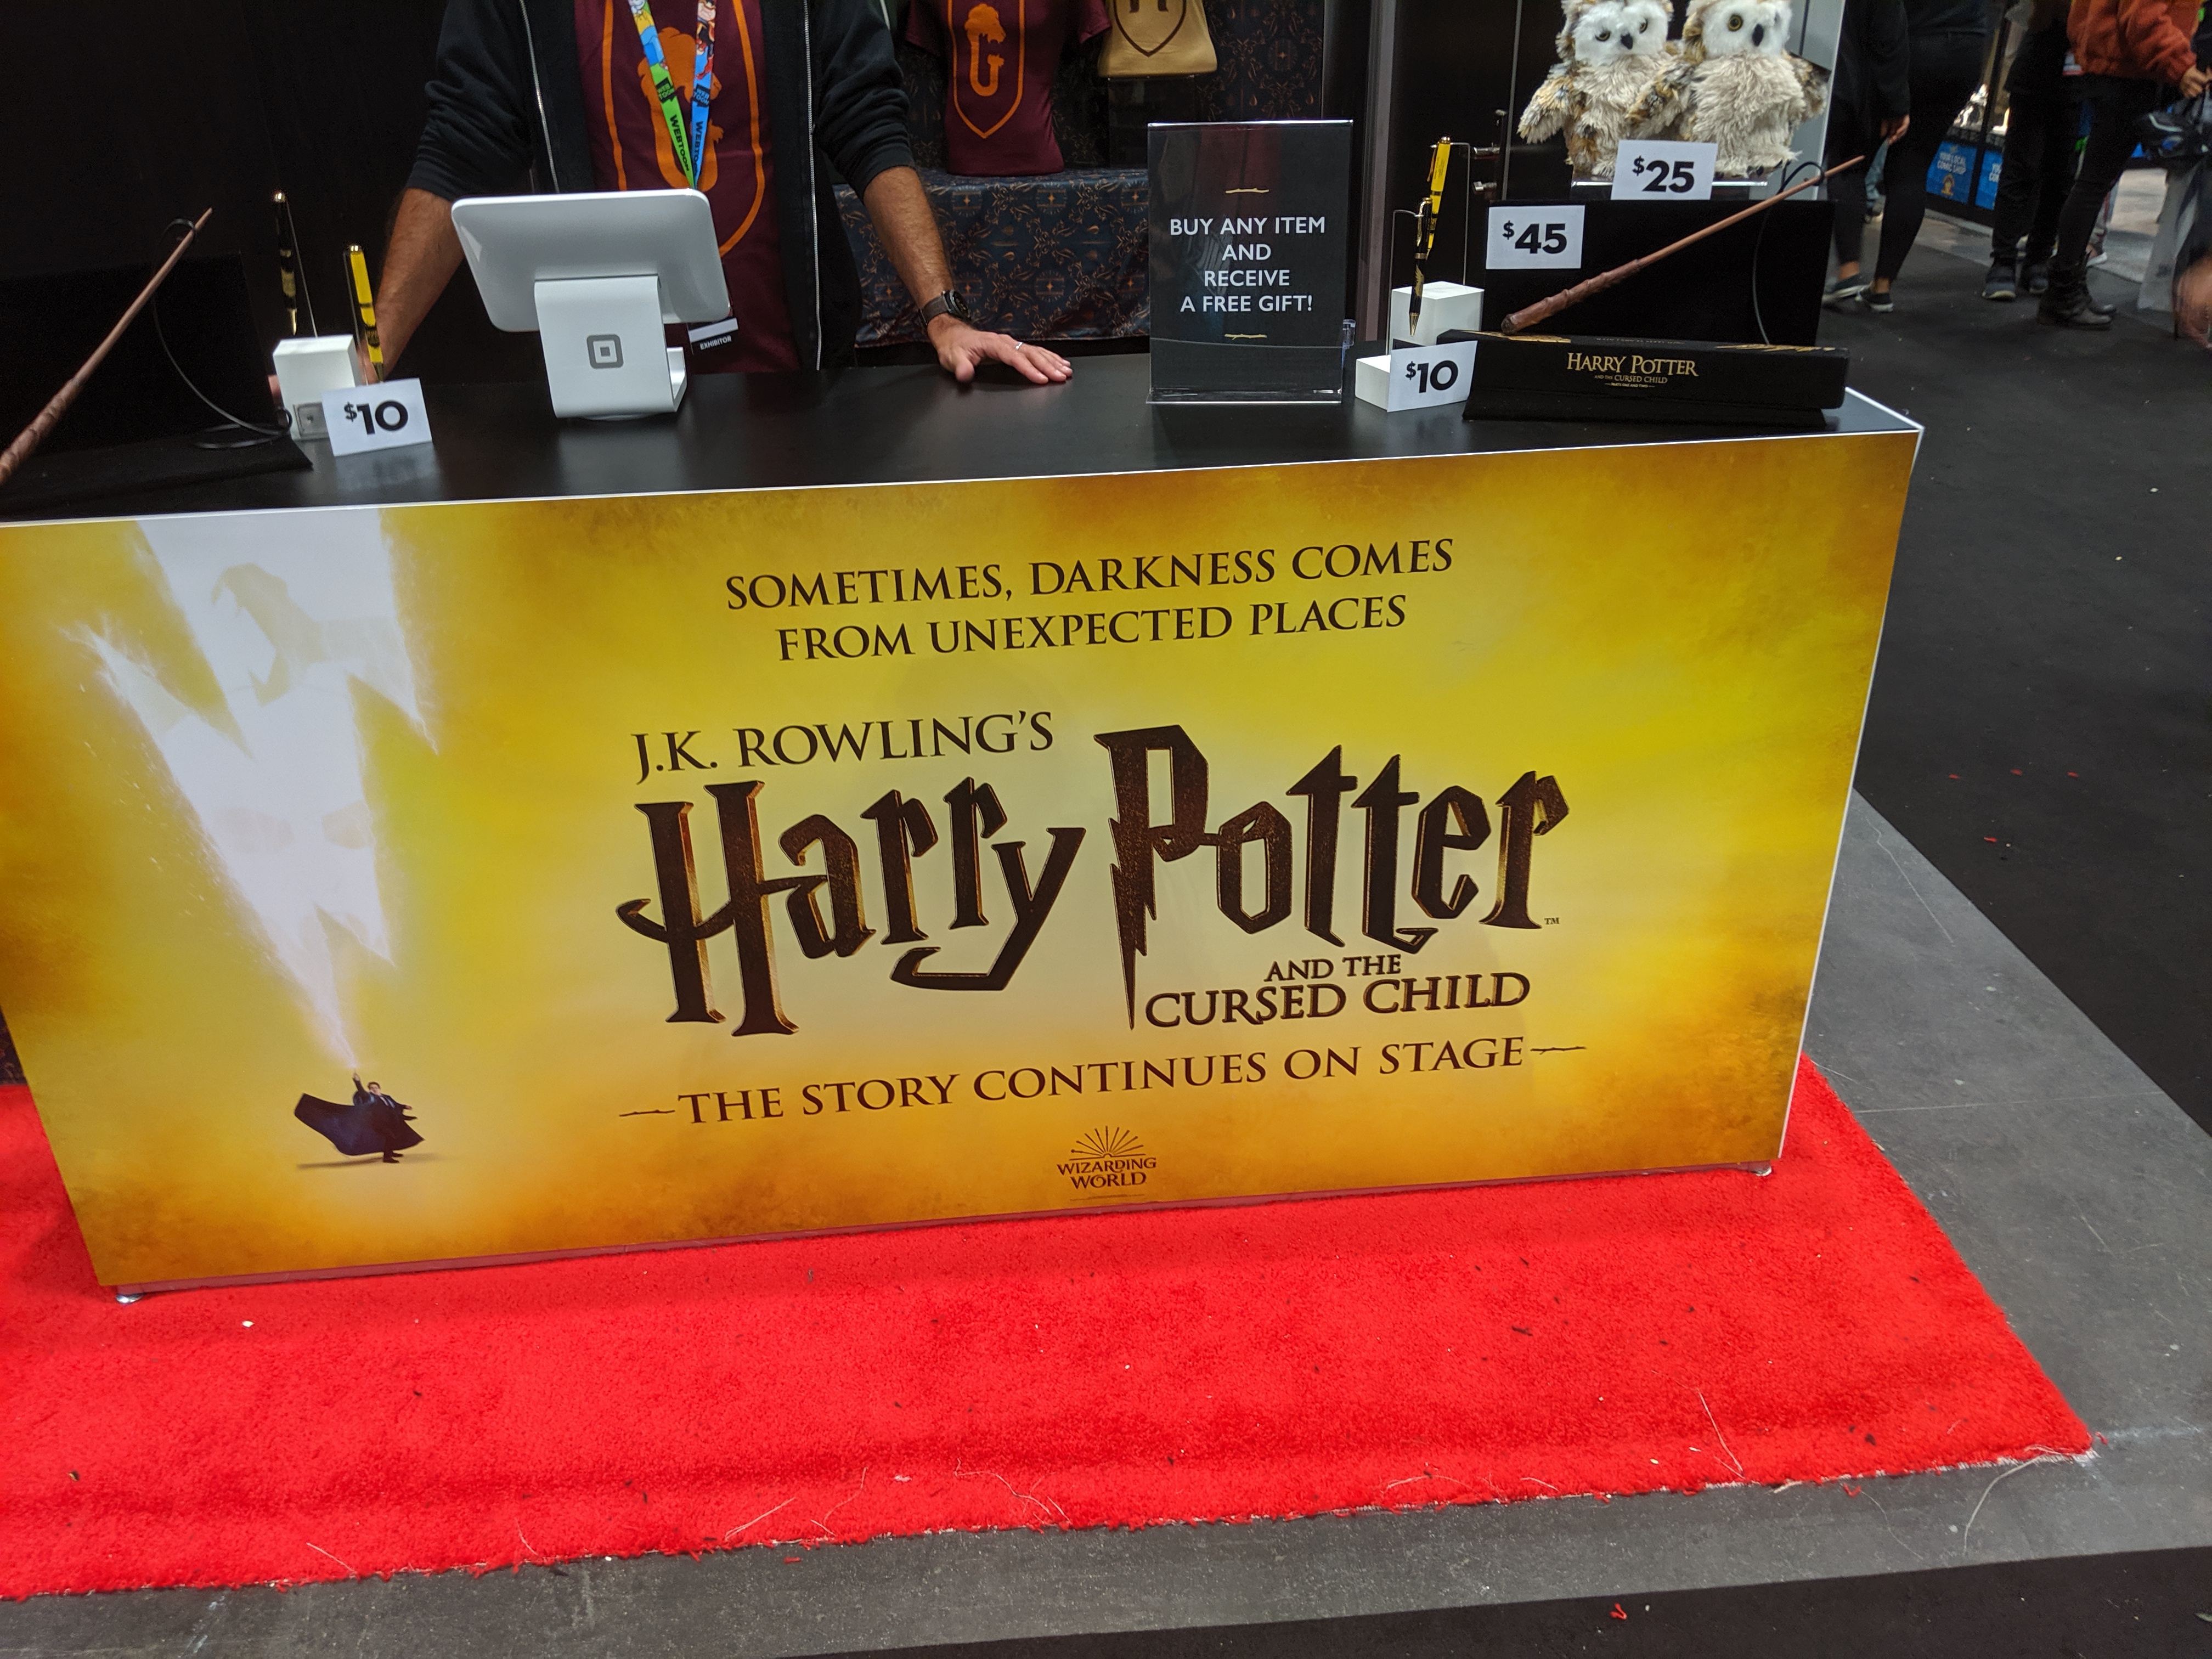 You can purchase merch as well as tickets for the Broadway production of the play at the “Cursed Child” booth.